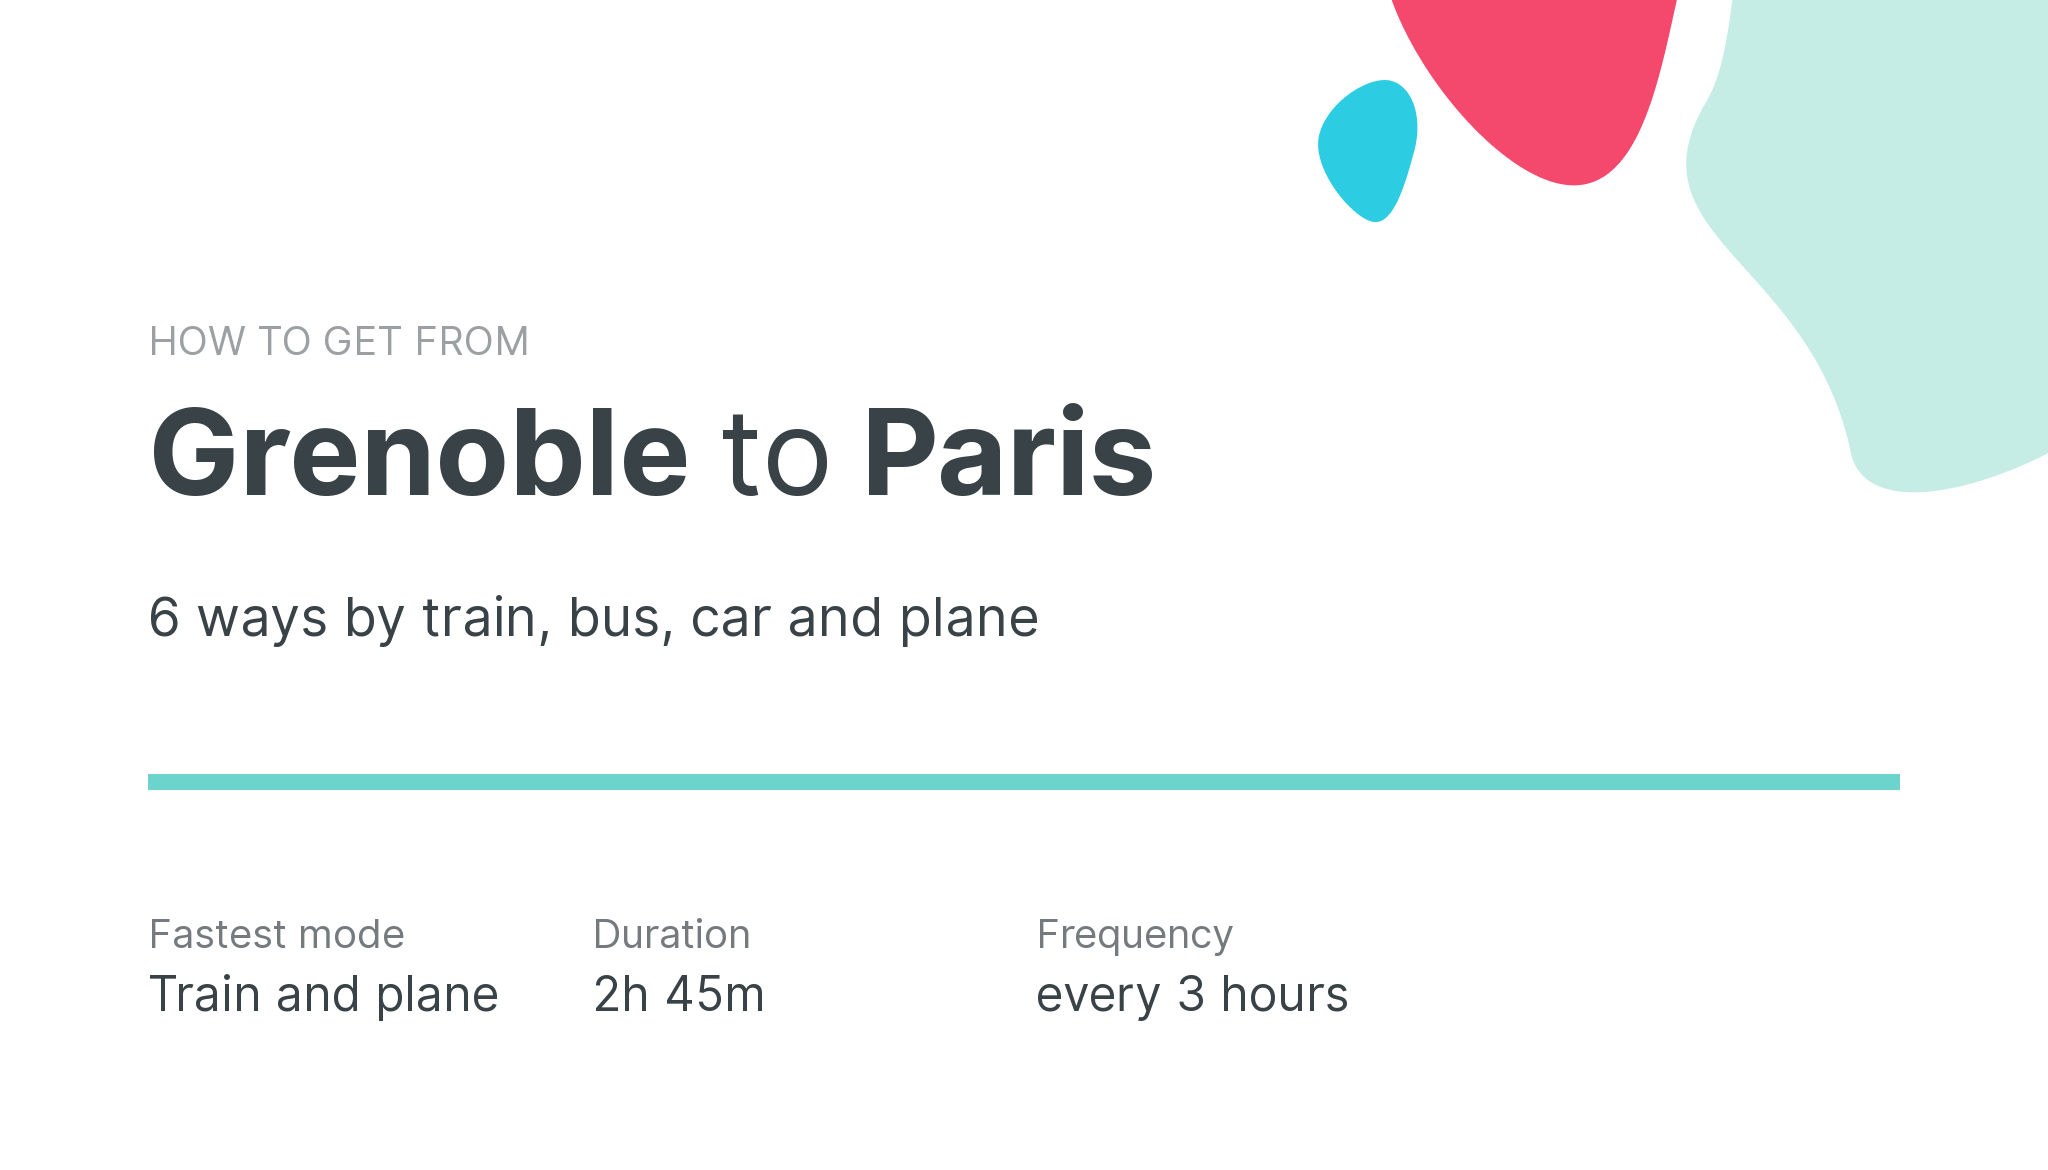 How do I get from Grenoble to Paris